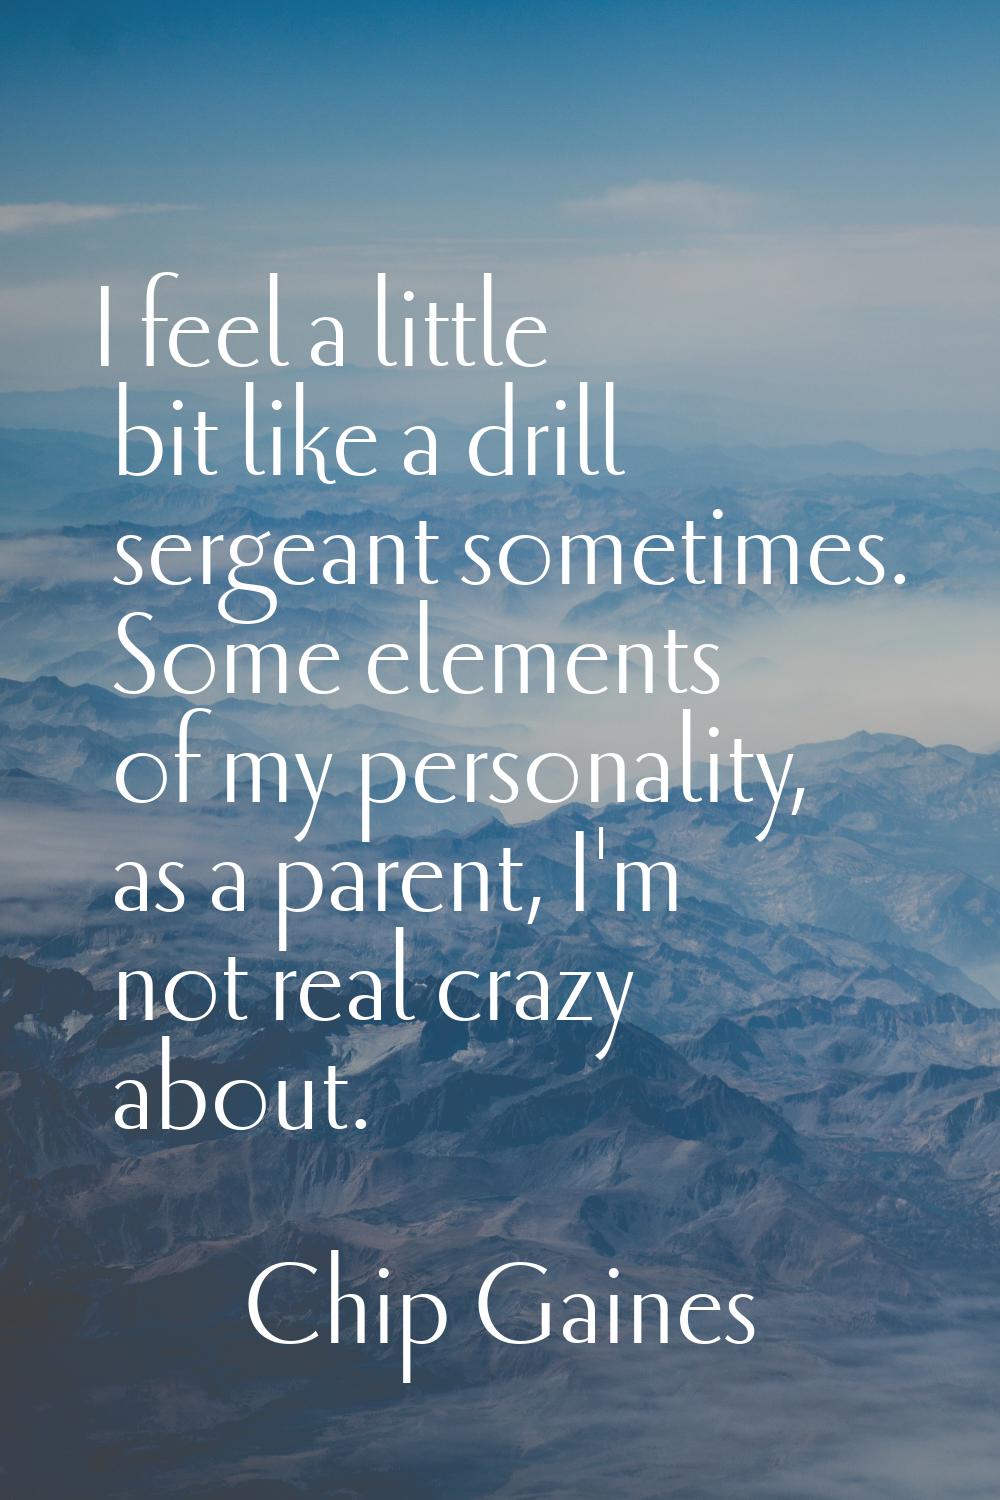 I feel a little bit like a drill sergeant sometimes. Some elements of my personality, as a parent, 